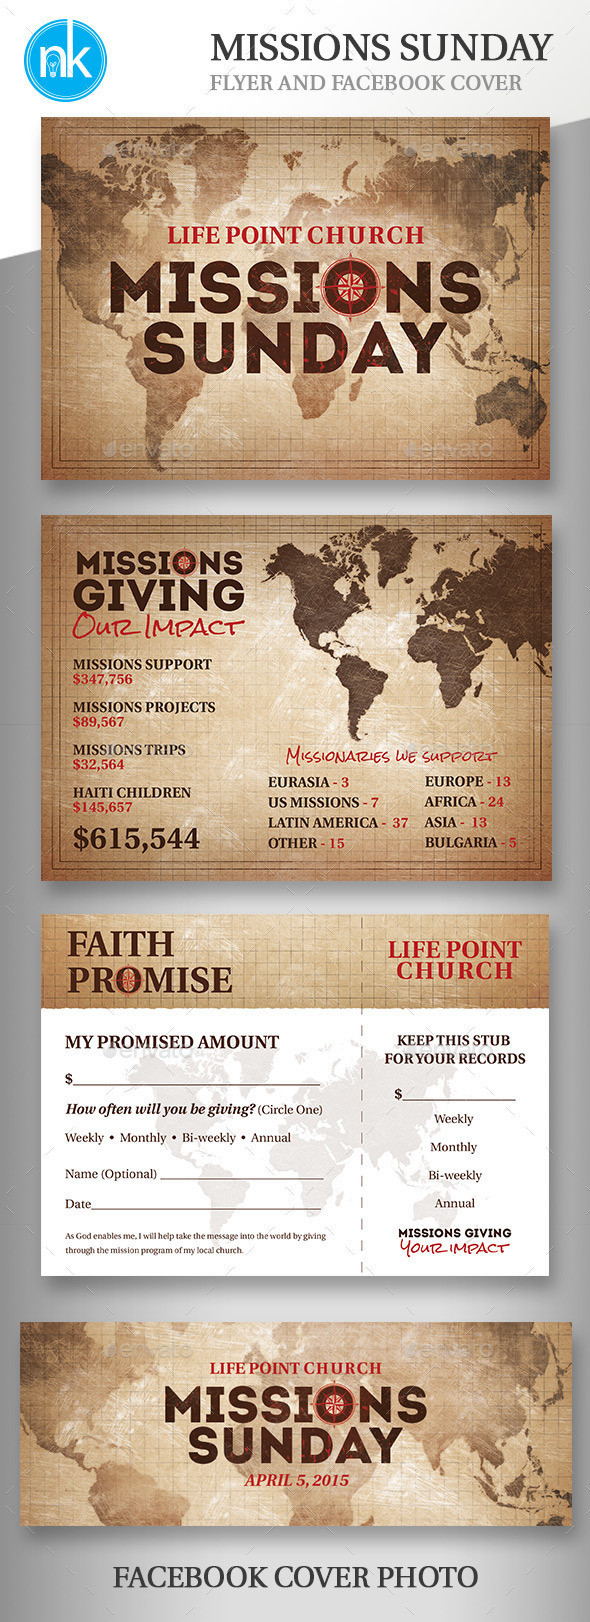 Missions sunday flyer preview